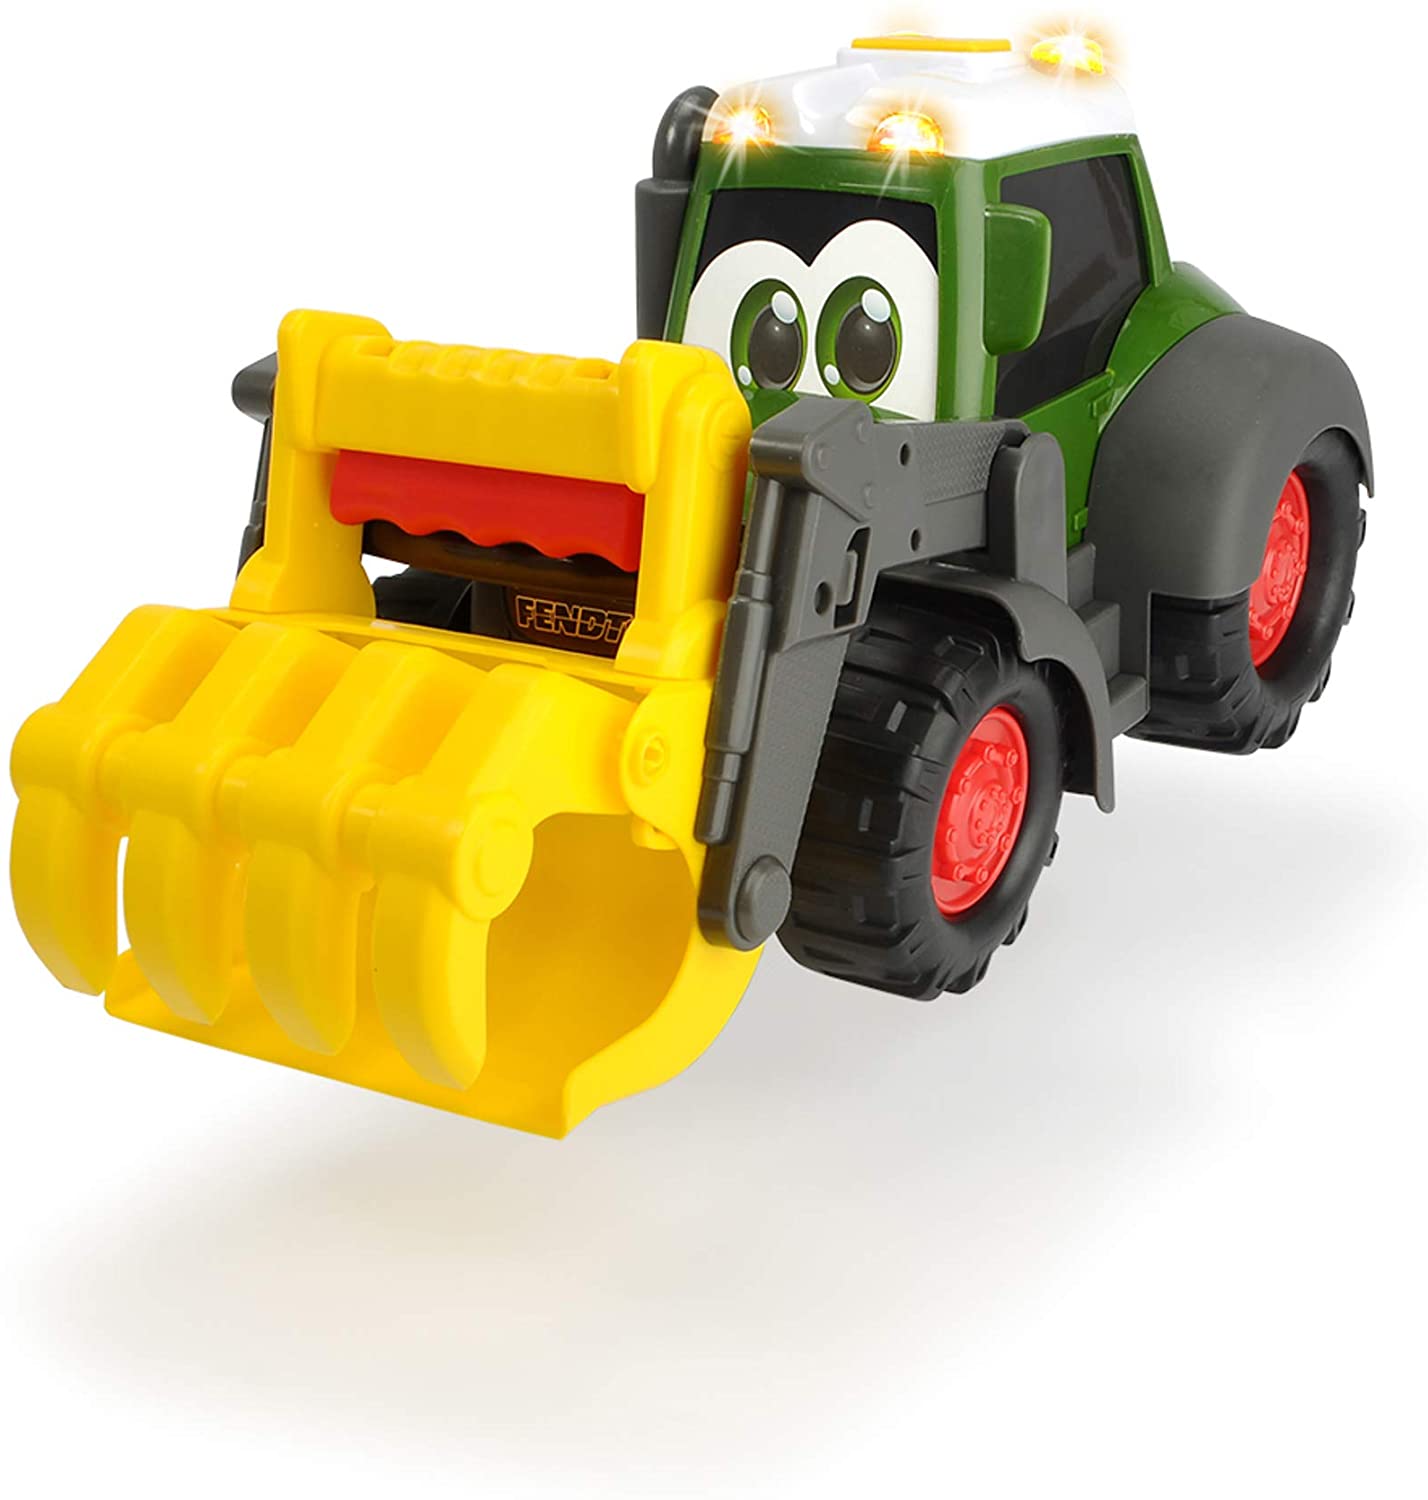 Dickie Toys Toy Digger Happy Fendt, Green